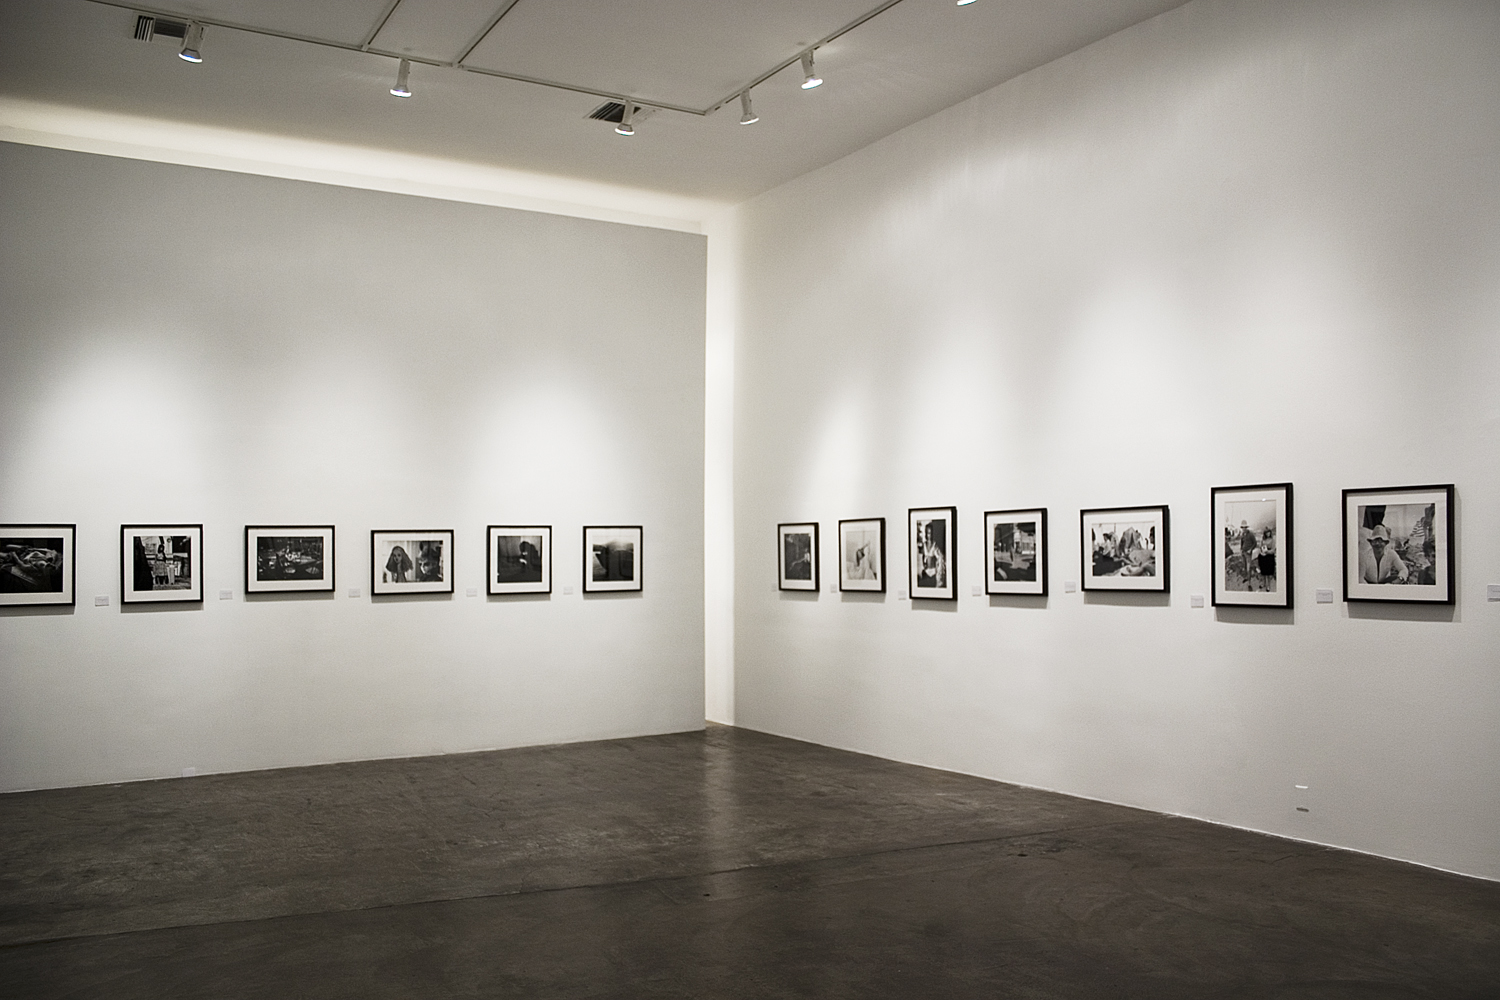 WALLACE BERMAN, Photographs and Other Works of Art: 1959-1976, November 30, 2007 – January 19, 2008